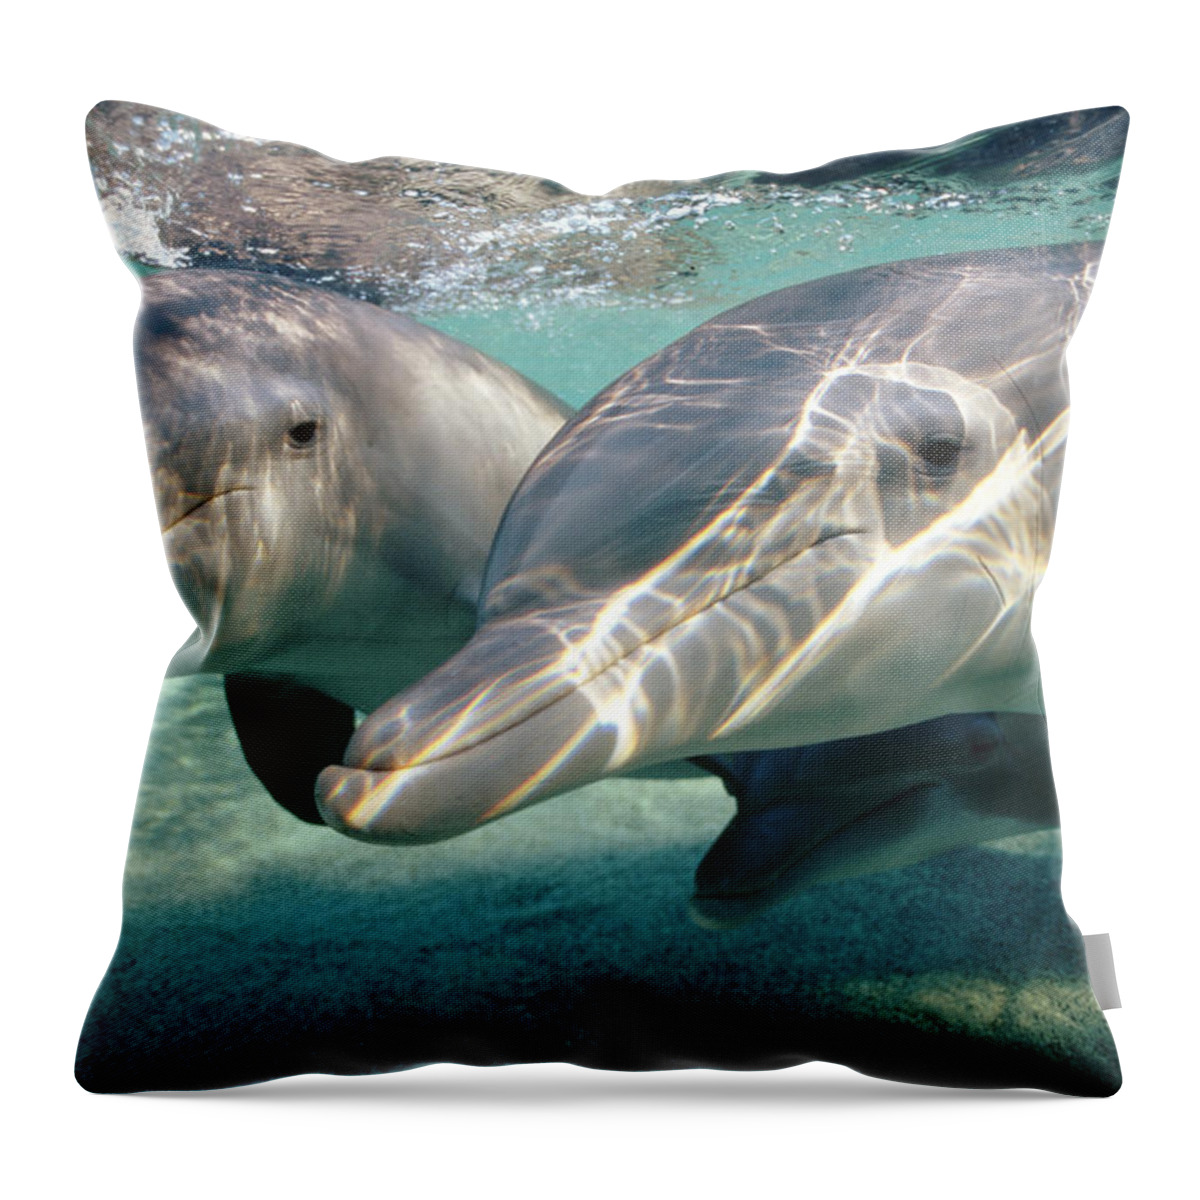 00087645 Throw Pillow featuring the photograph Bottlenose Dolphin Underwater Pair by Flip Nicklin